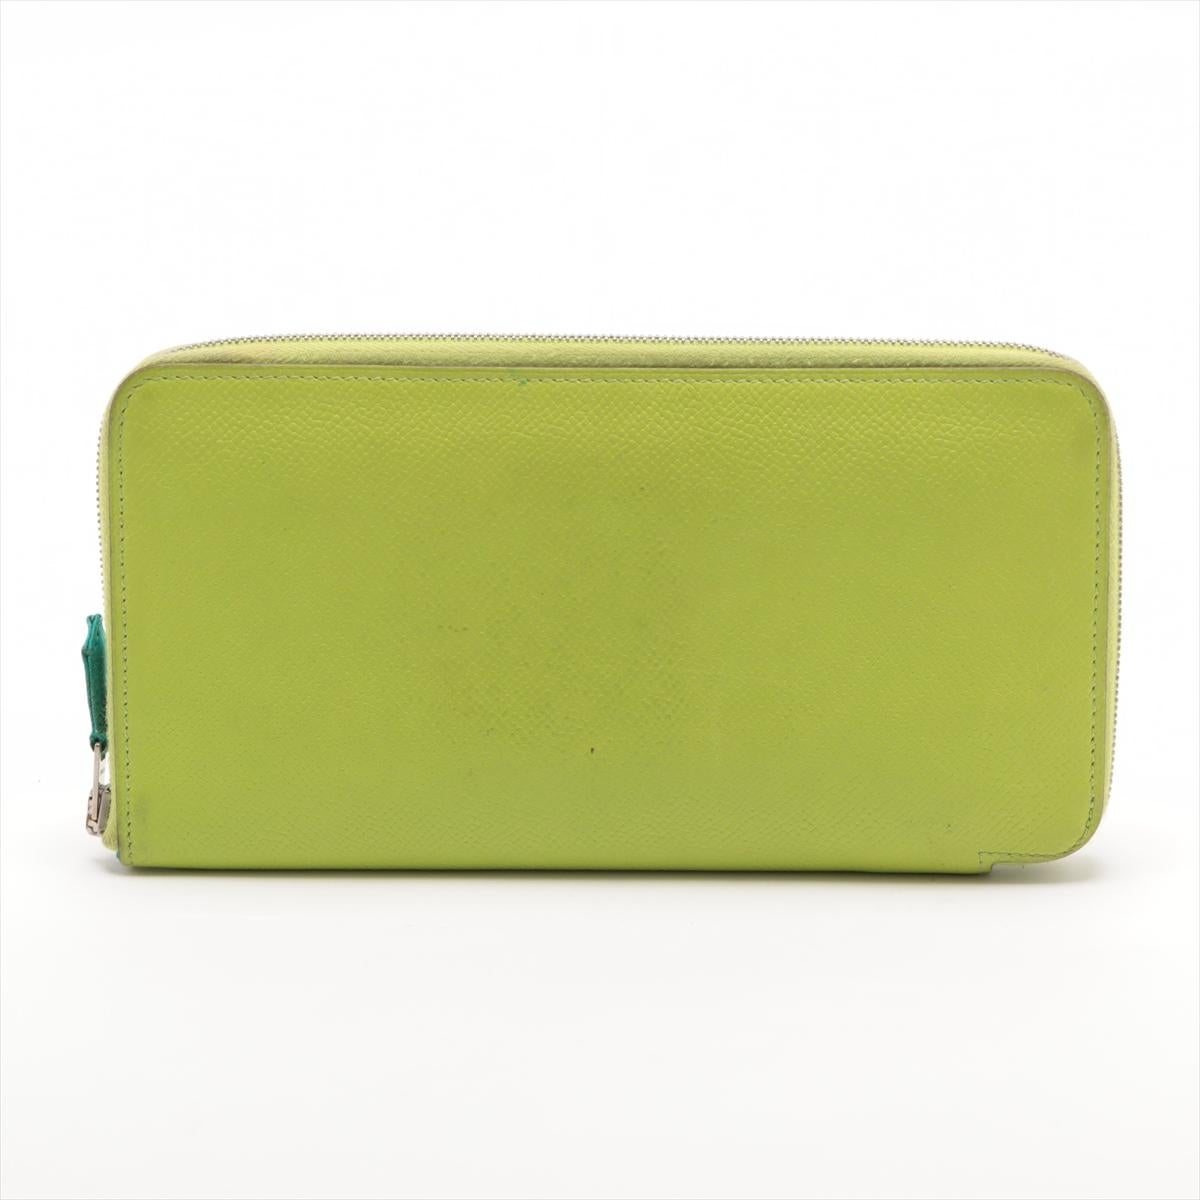 Hermès Azap Veau Epsom Long Zippy Wallet Apple Green In Good Condition For Sale In Indianapolis, IN